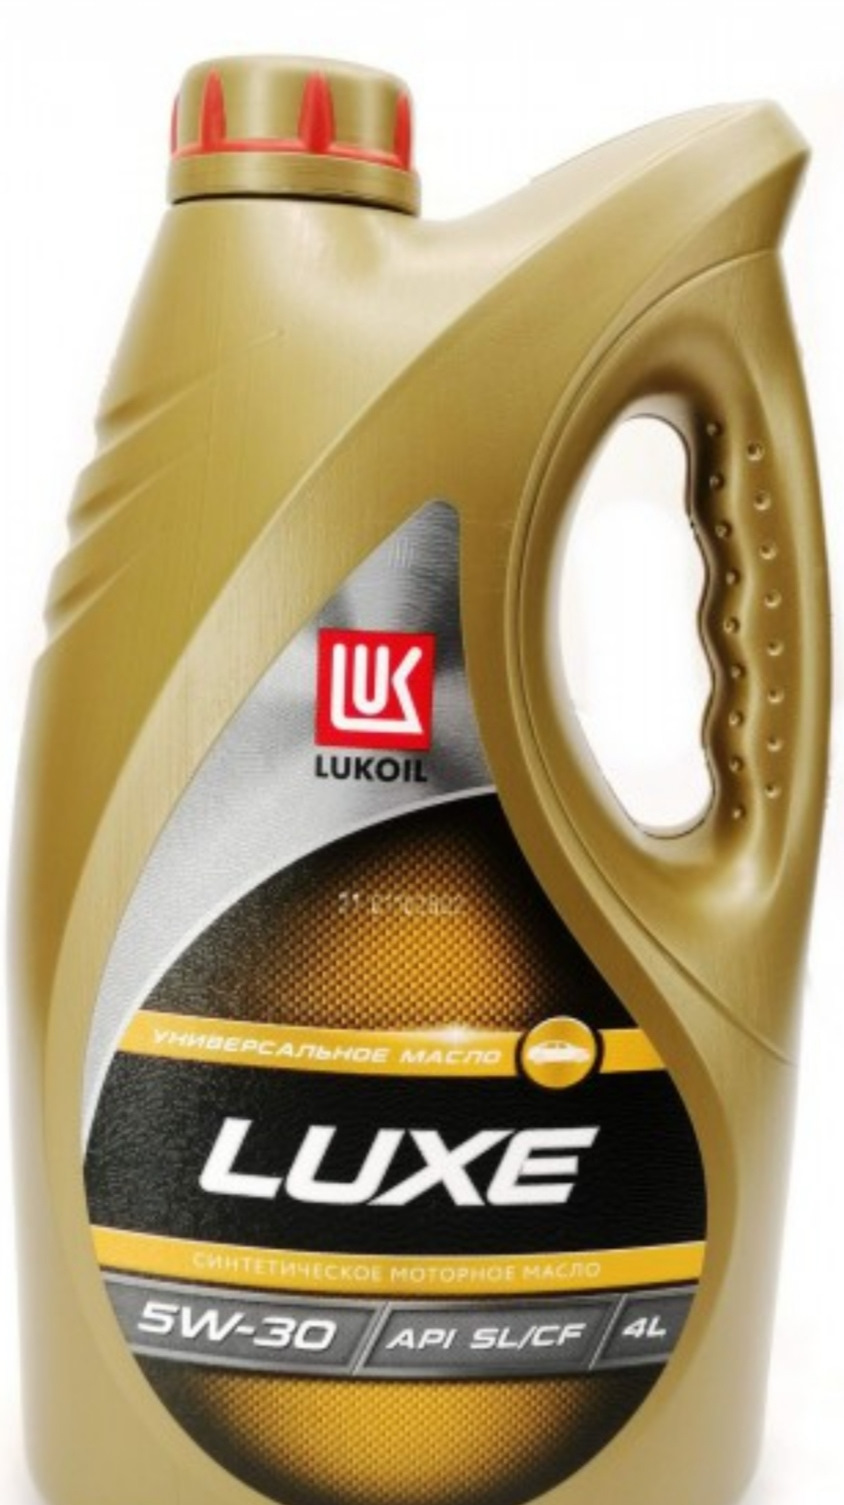 Тест масла лукойл 5w30. Lukoil Luxe 5w-30. Lukoil Luxe 5w-40. Масло Лукойл 5w40 синтетика. Масло Лукойл Люкс 5-40.